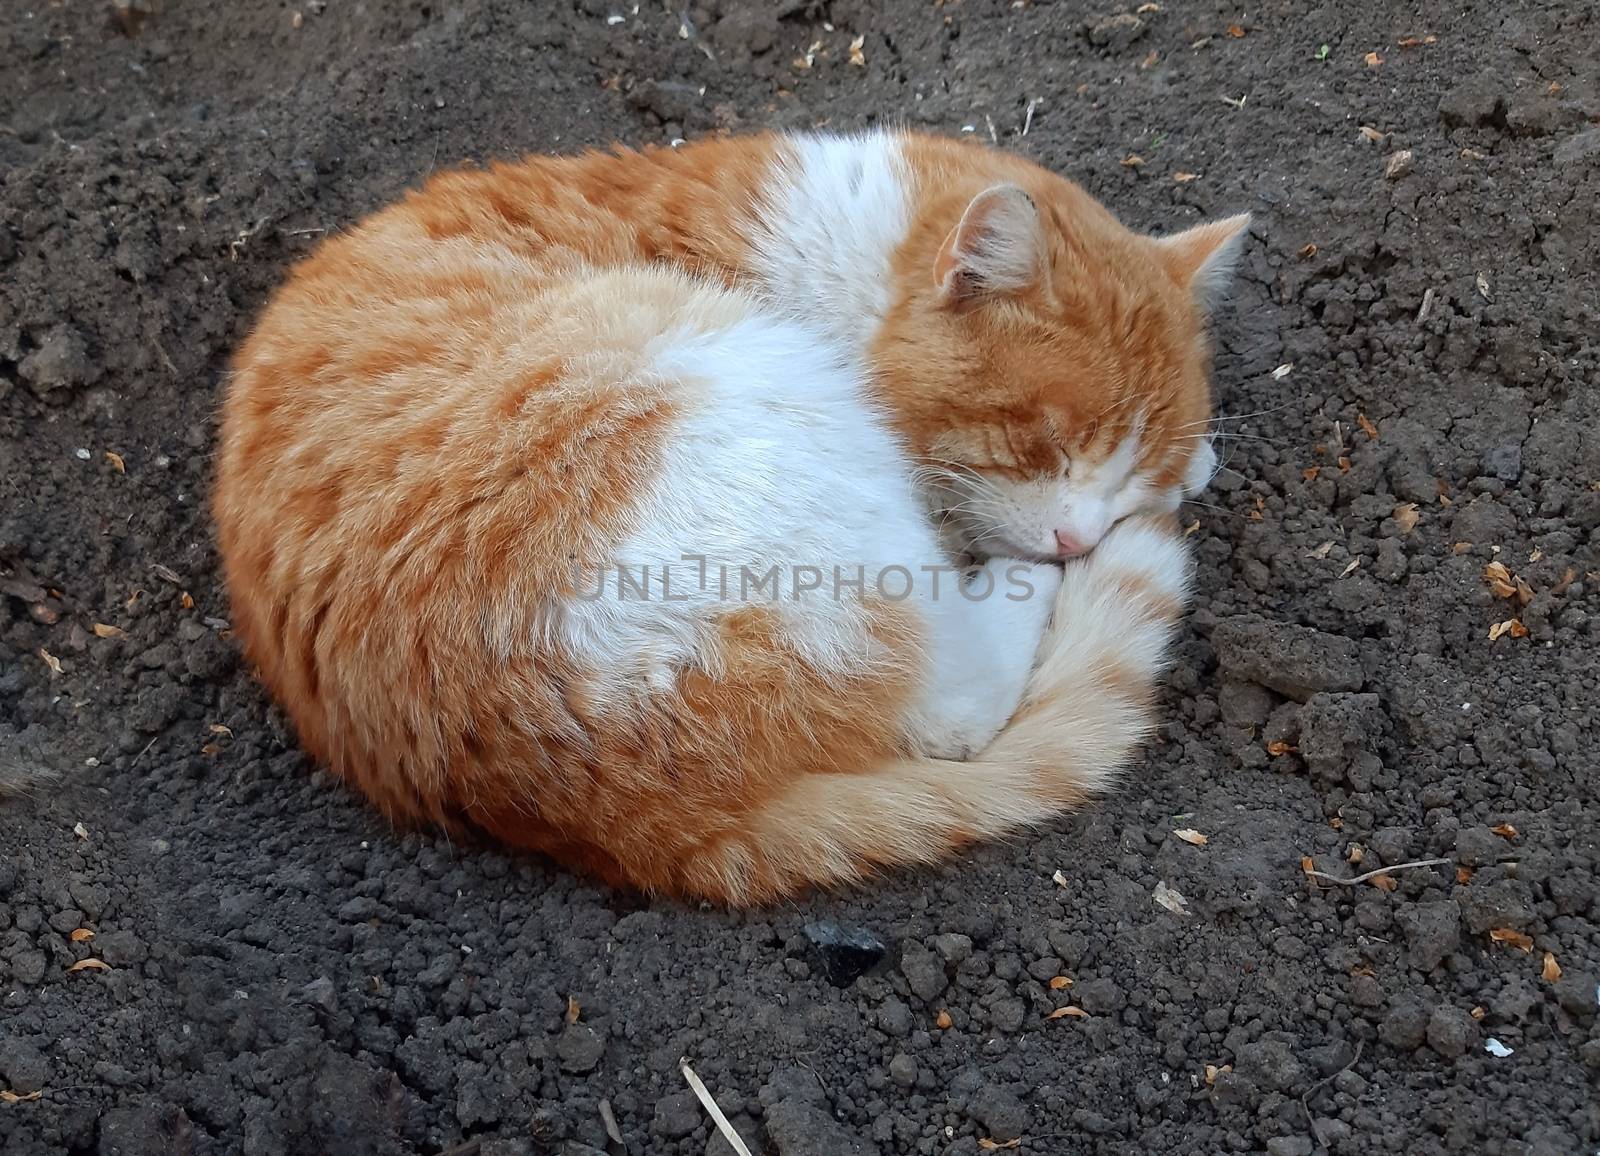 A beautiful orange cat sleeping outside on the surface of the soil by Mindru